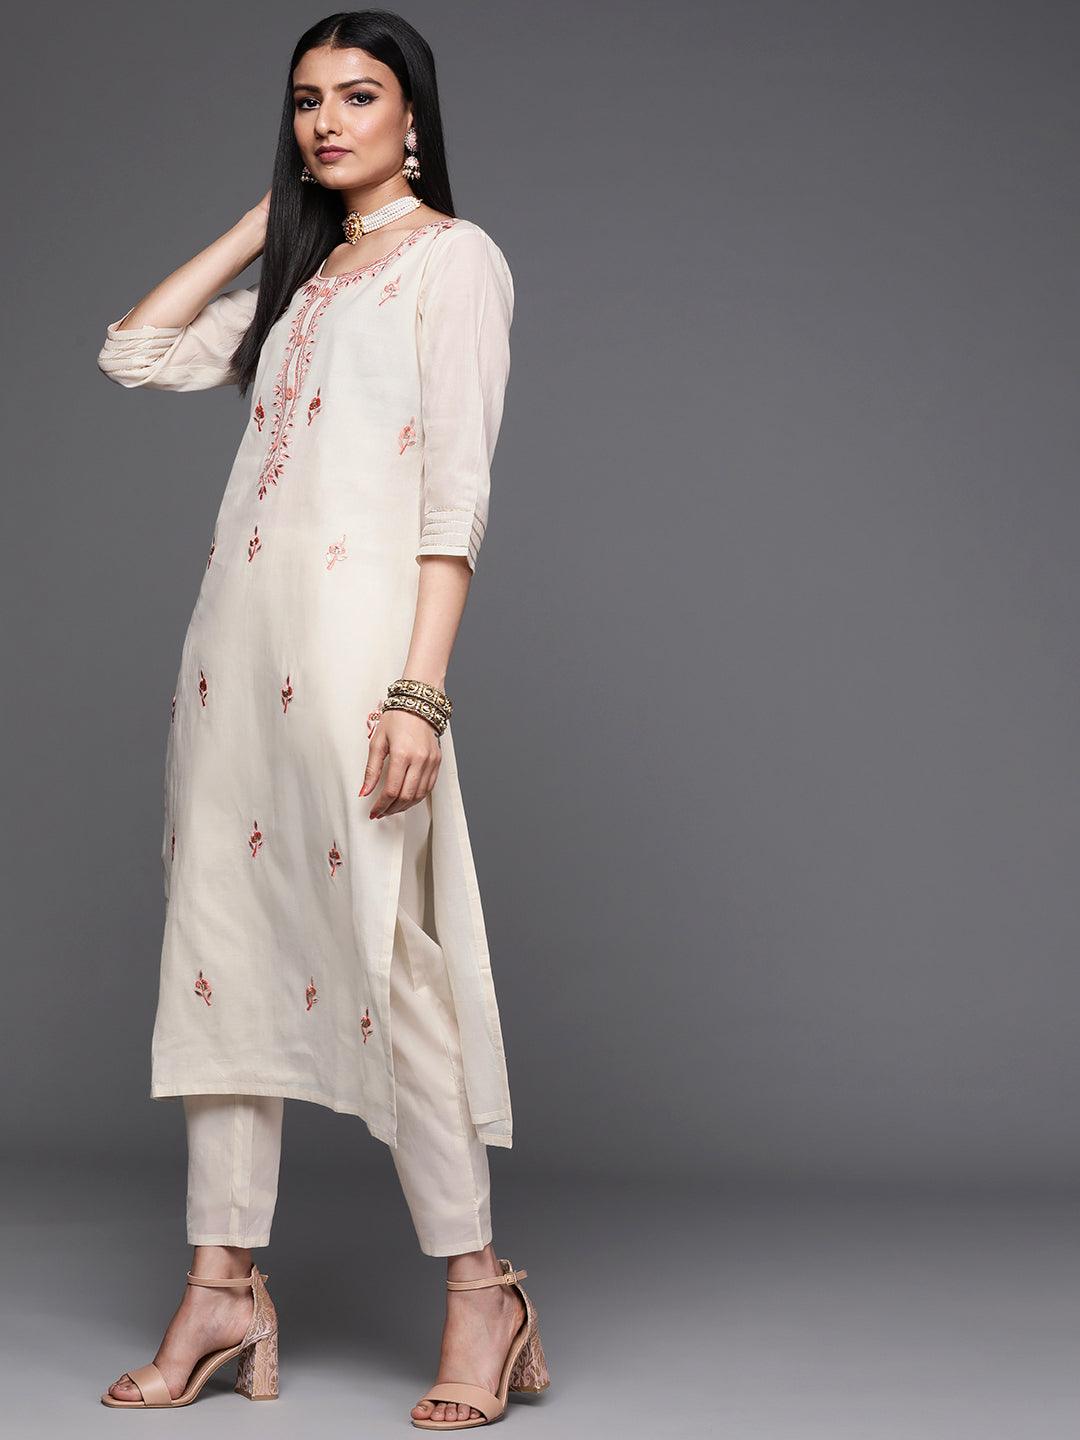 Off White Embroidered Cotton Suit Set - Libas